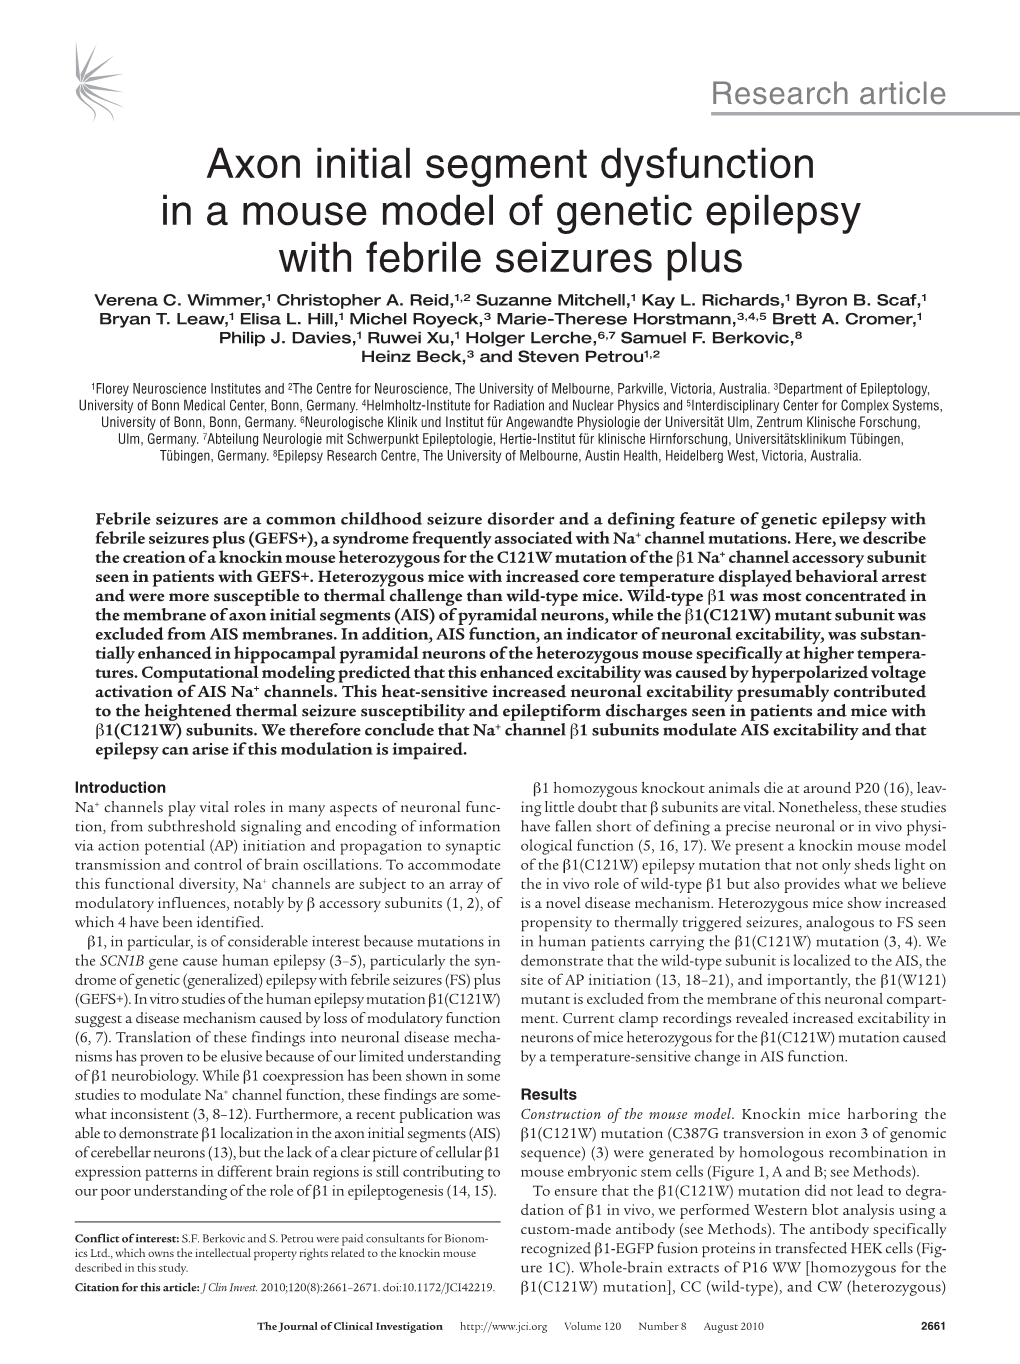 Axon Initial Segment Dysfunction in a Mouse Model of Genetic Epilepsy with Febrile Seizures Plus Verena C